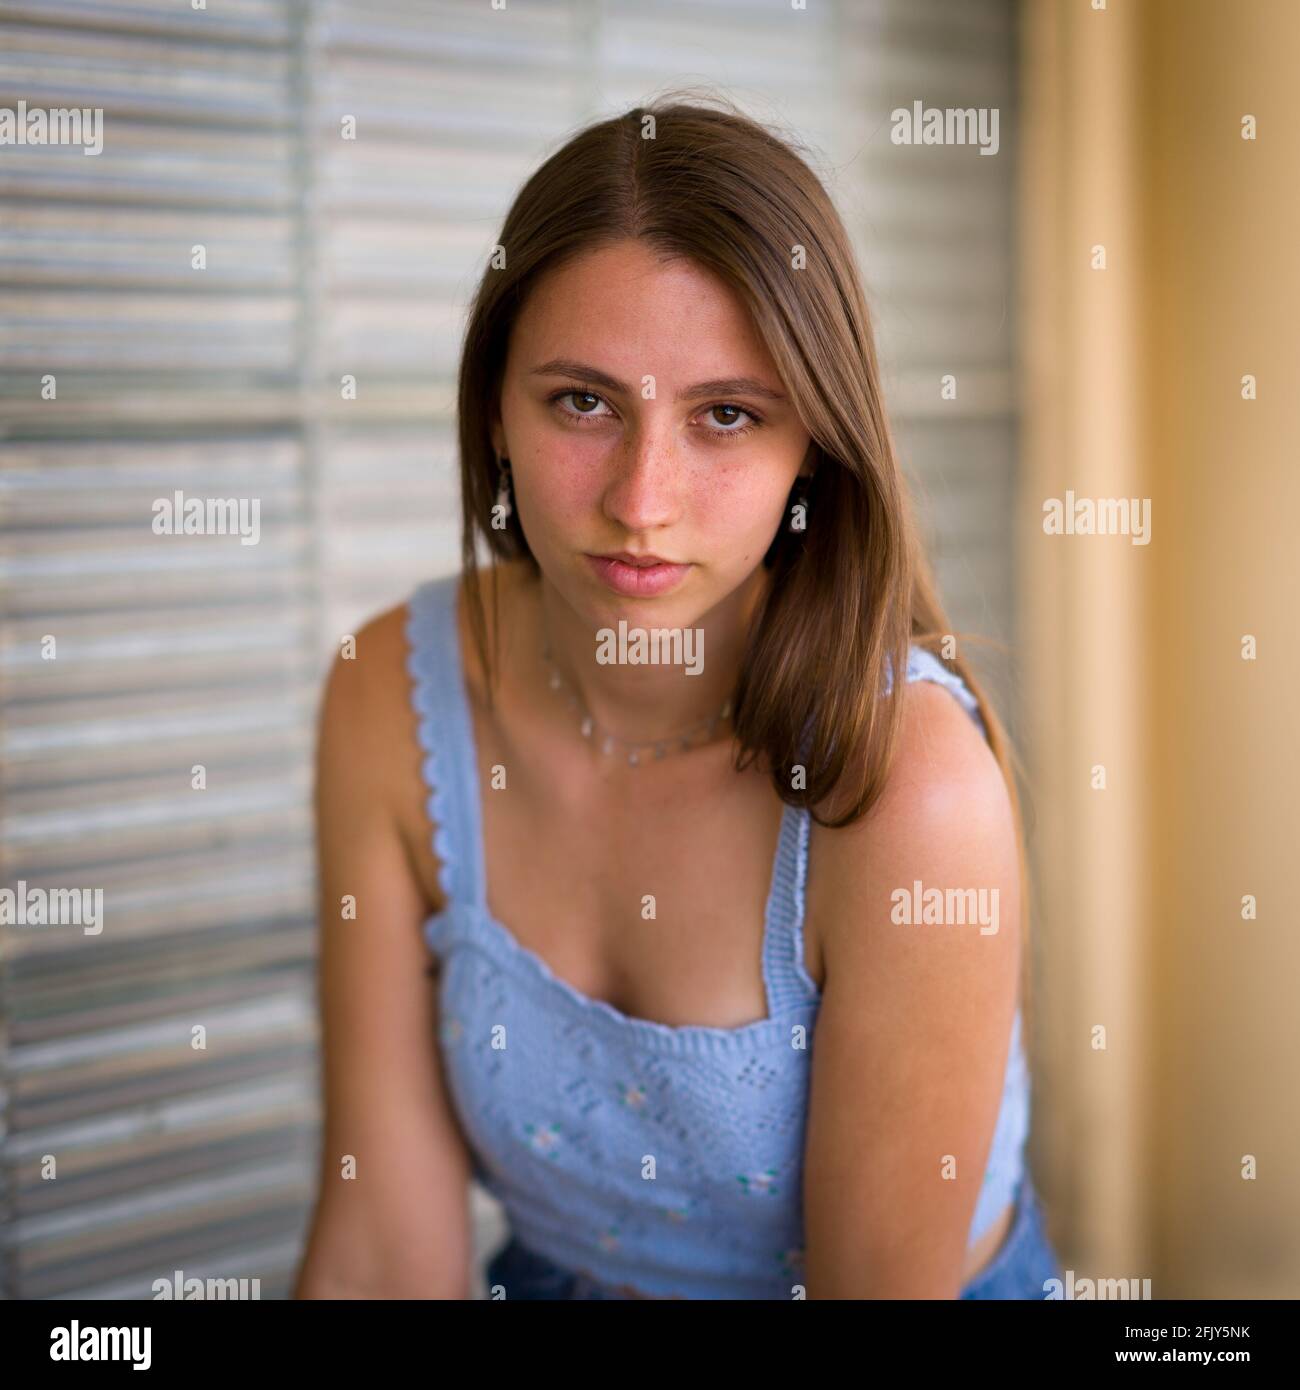 Portrait of young woman seated in front of an art deco glass wall Stock Photo